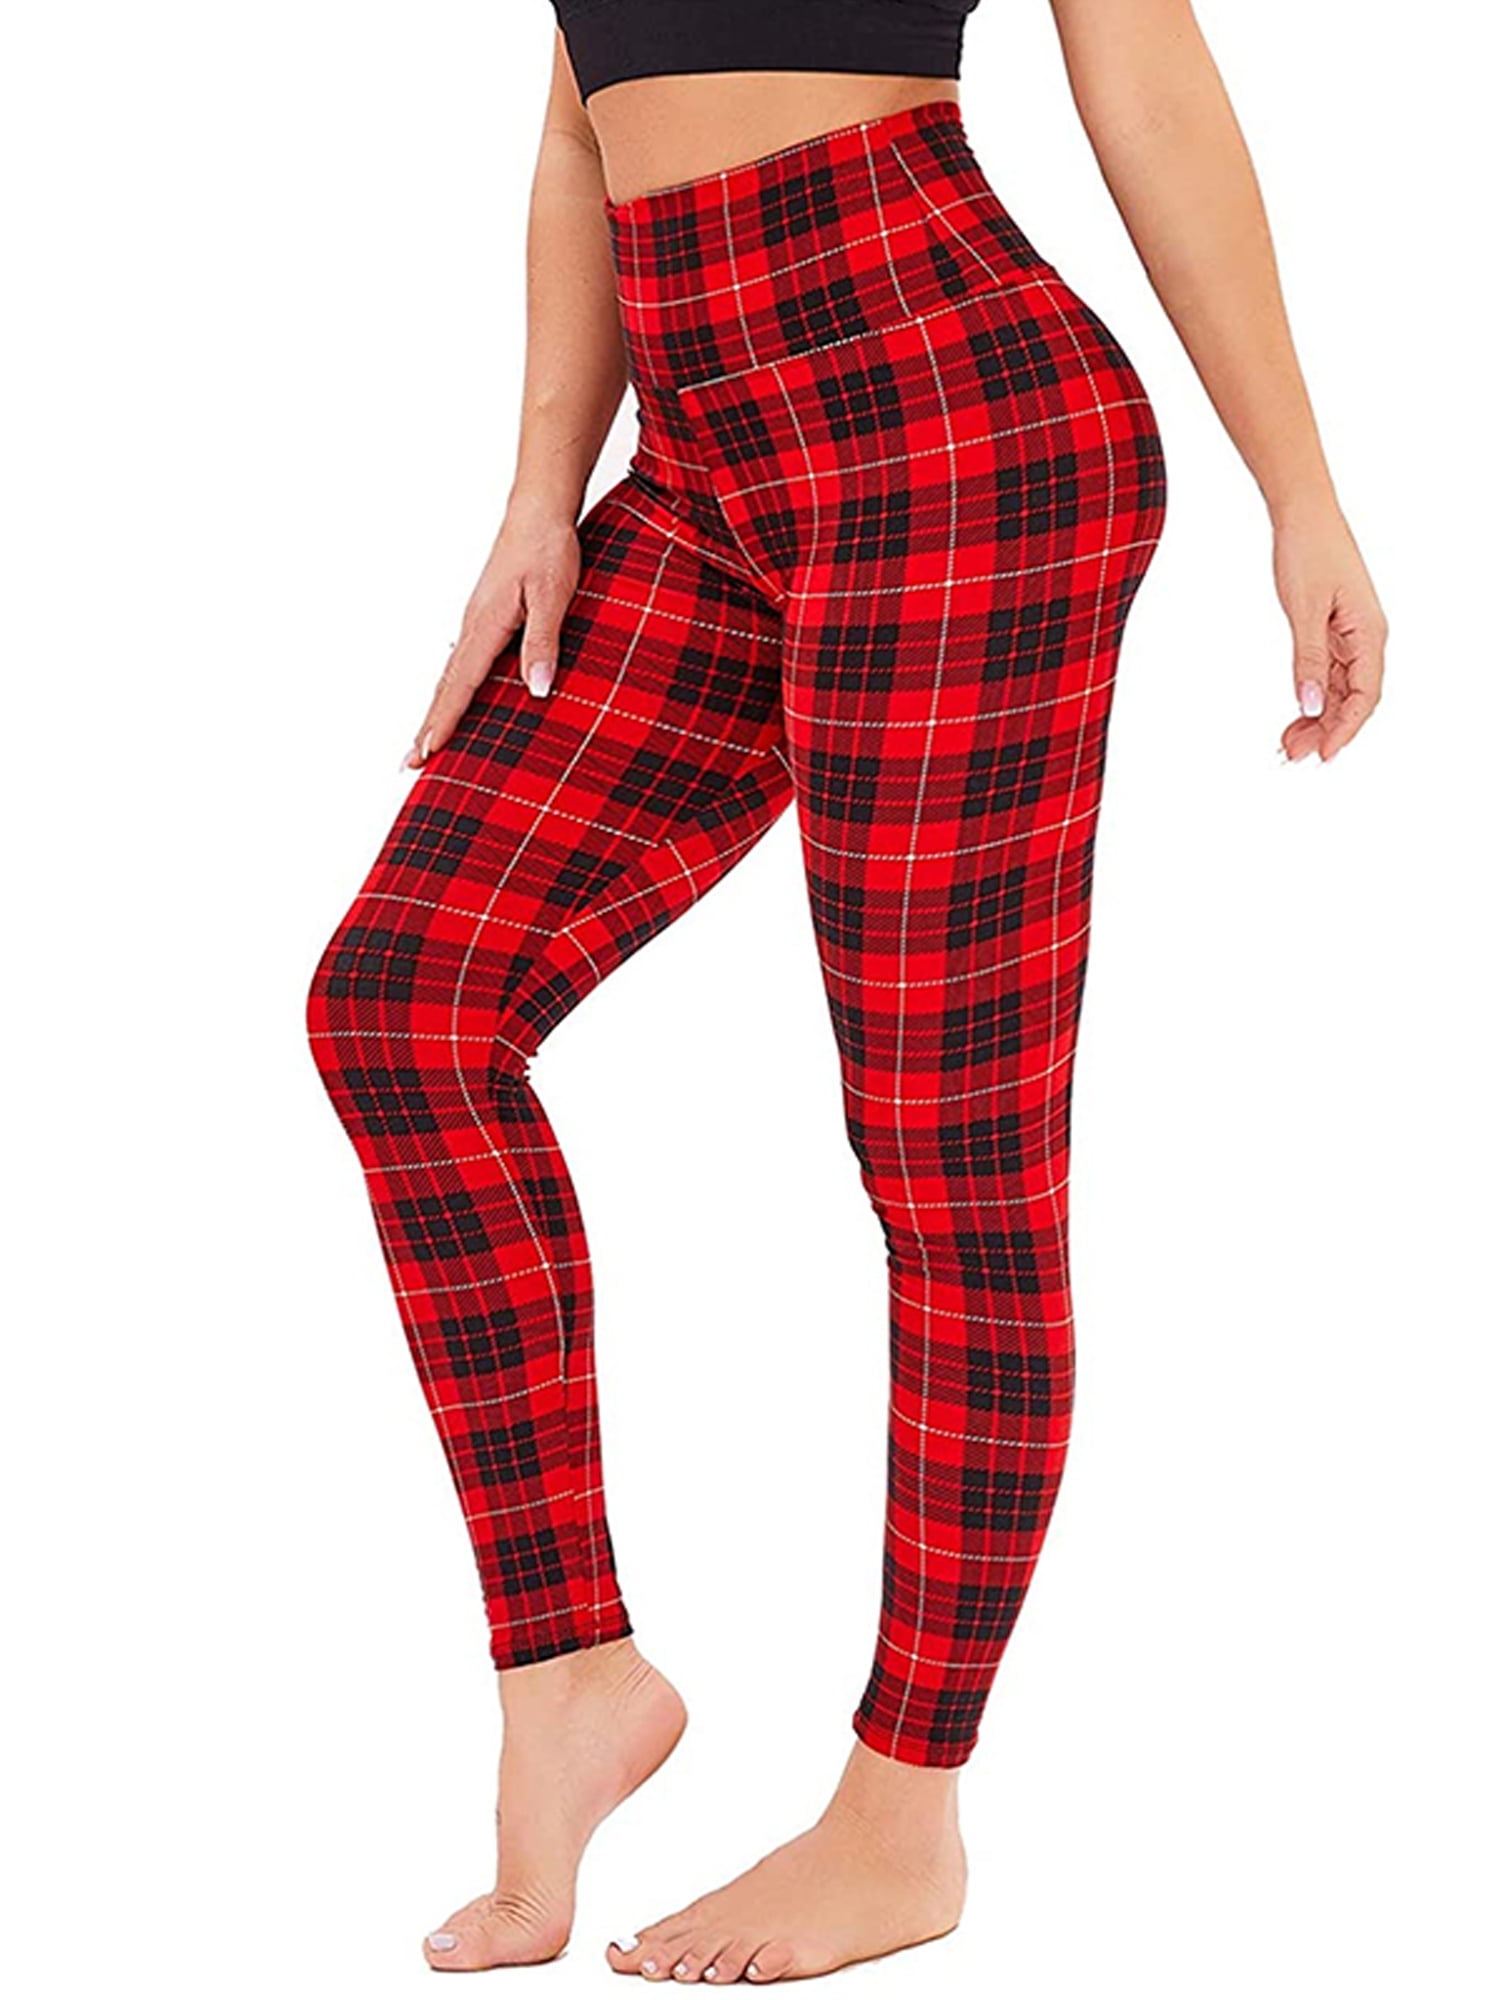 Frontwalk Ladies Tight High Waist Yoga Leggings Plaid Printed Stretchy Tights  Women Color Stitching Jogging Pants 